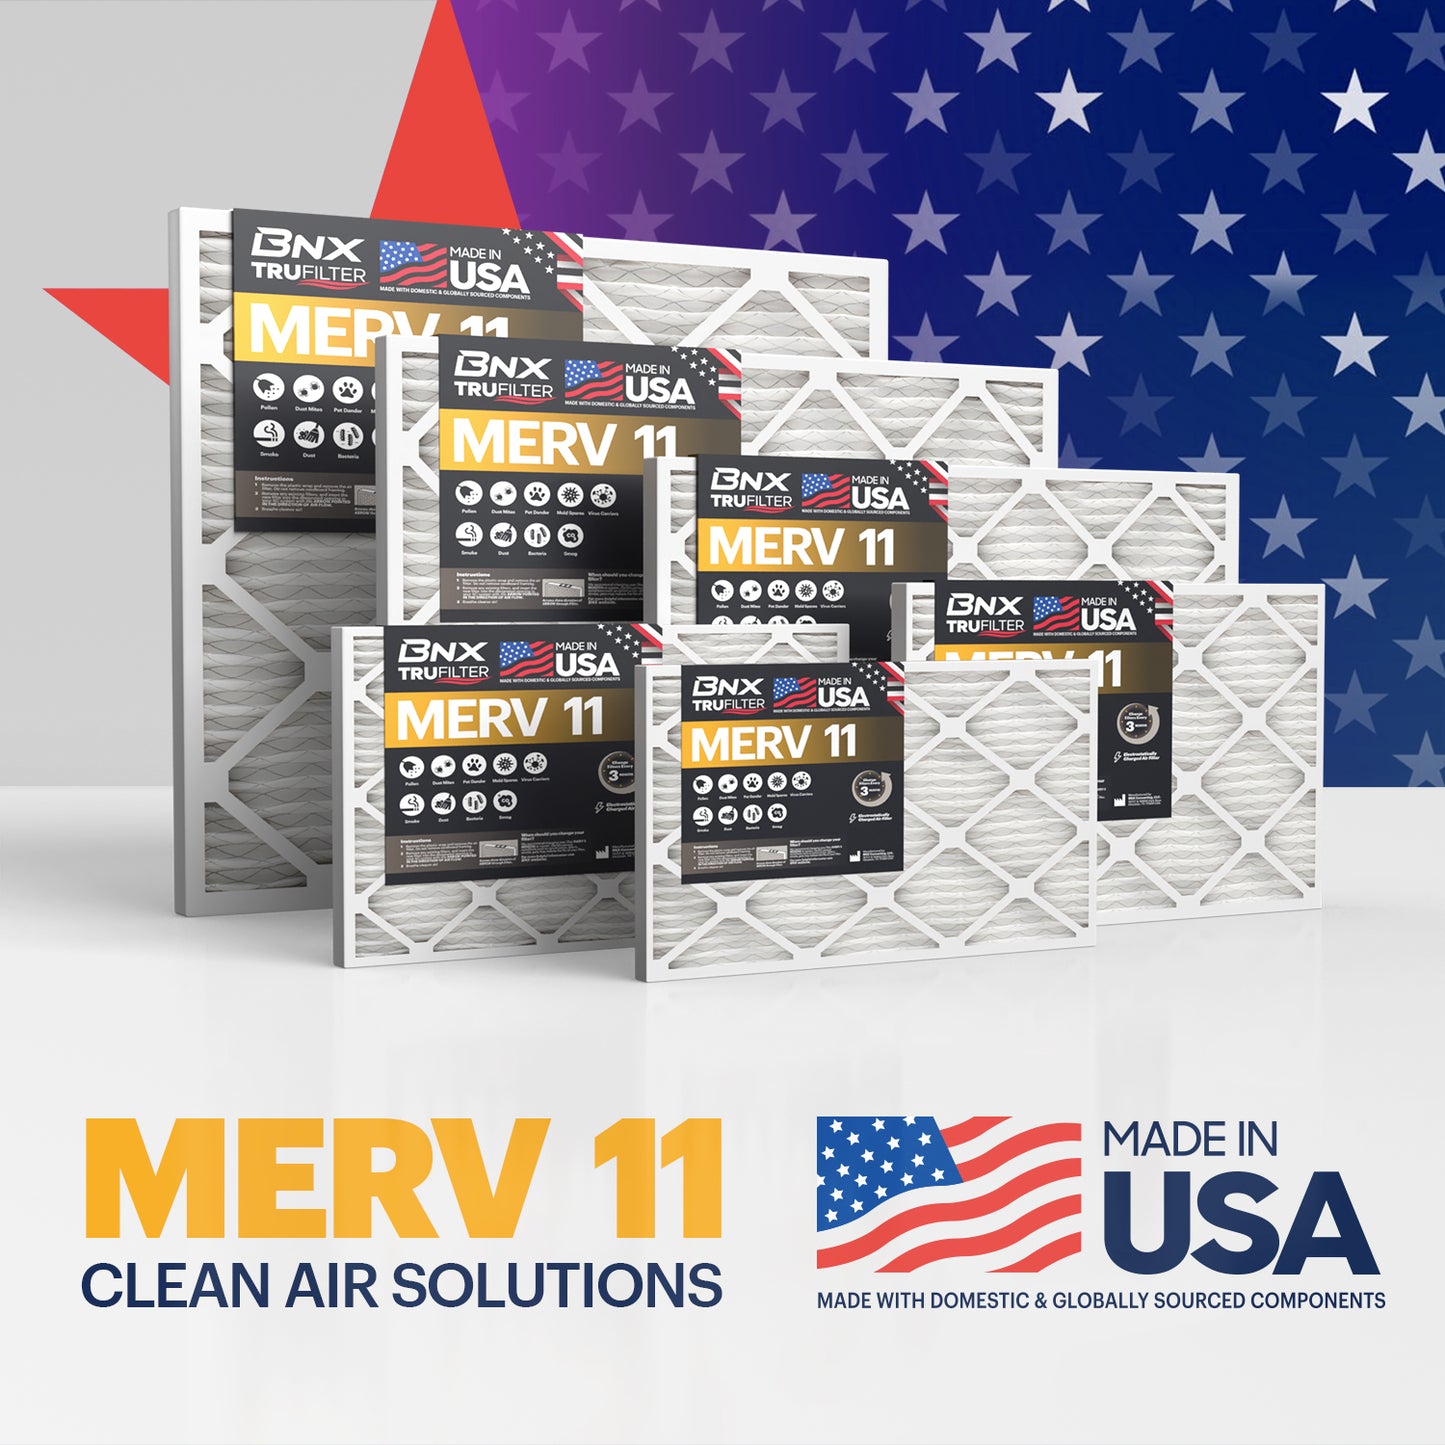 BNX TruFilter 16x20x1 Air Filter MERV 11 (4-Pack) - MADE IN USA - Allergen Defense Electrostatic Pleated Air Conditioner HVAC AC Furnace Filters for Allergies, Dust, Pet, Smoke, Allergy MPR 1200 FPR 7